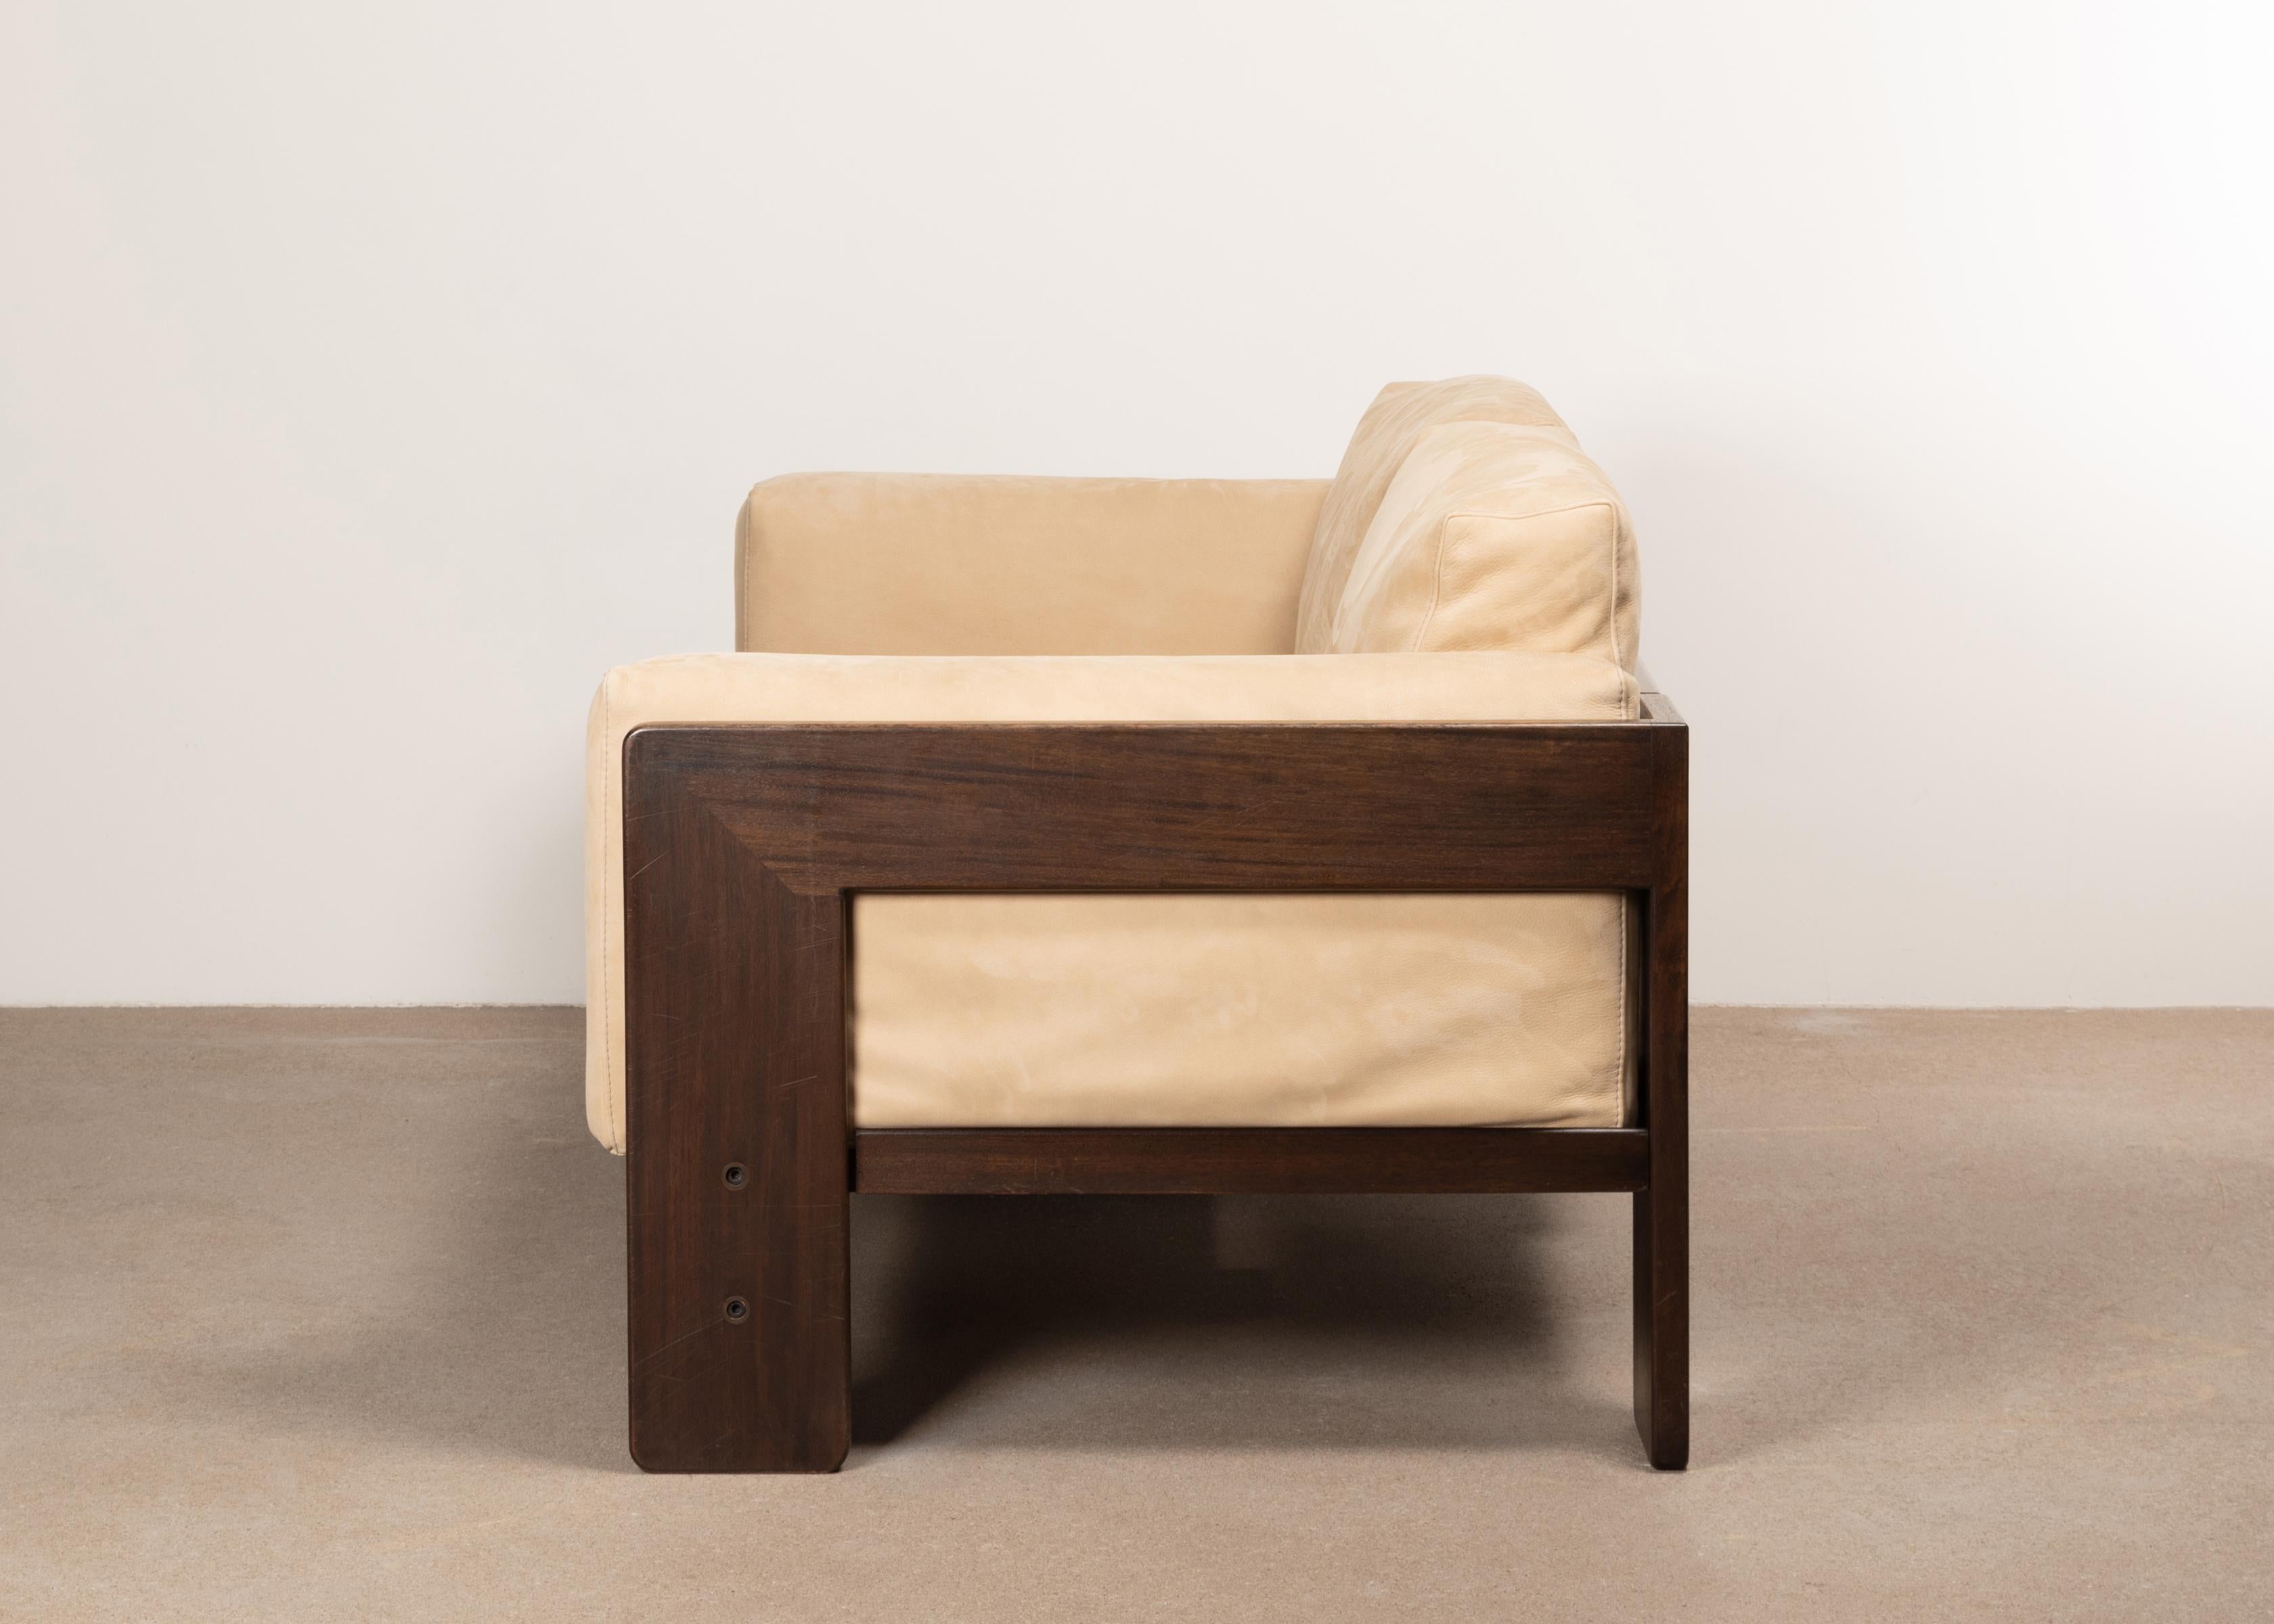 Mid-20th Century Tobia Scarpa Bastiano 2-Seater Sofa in Walnut and Beige Suede Leather for Knoll